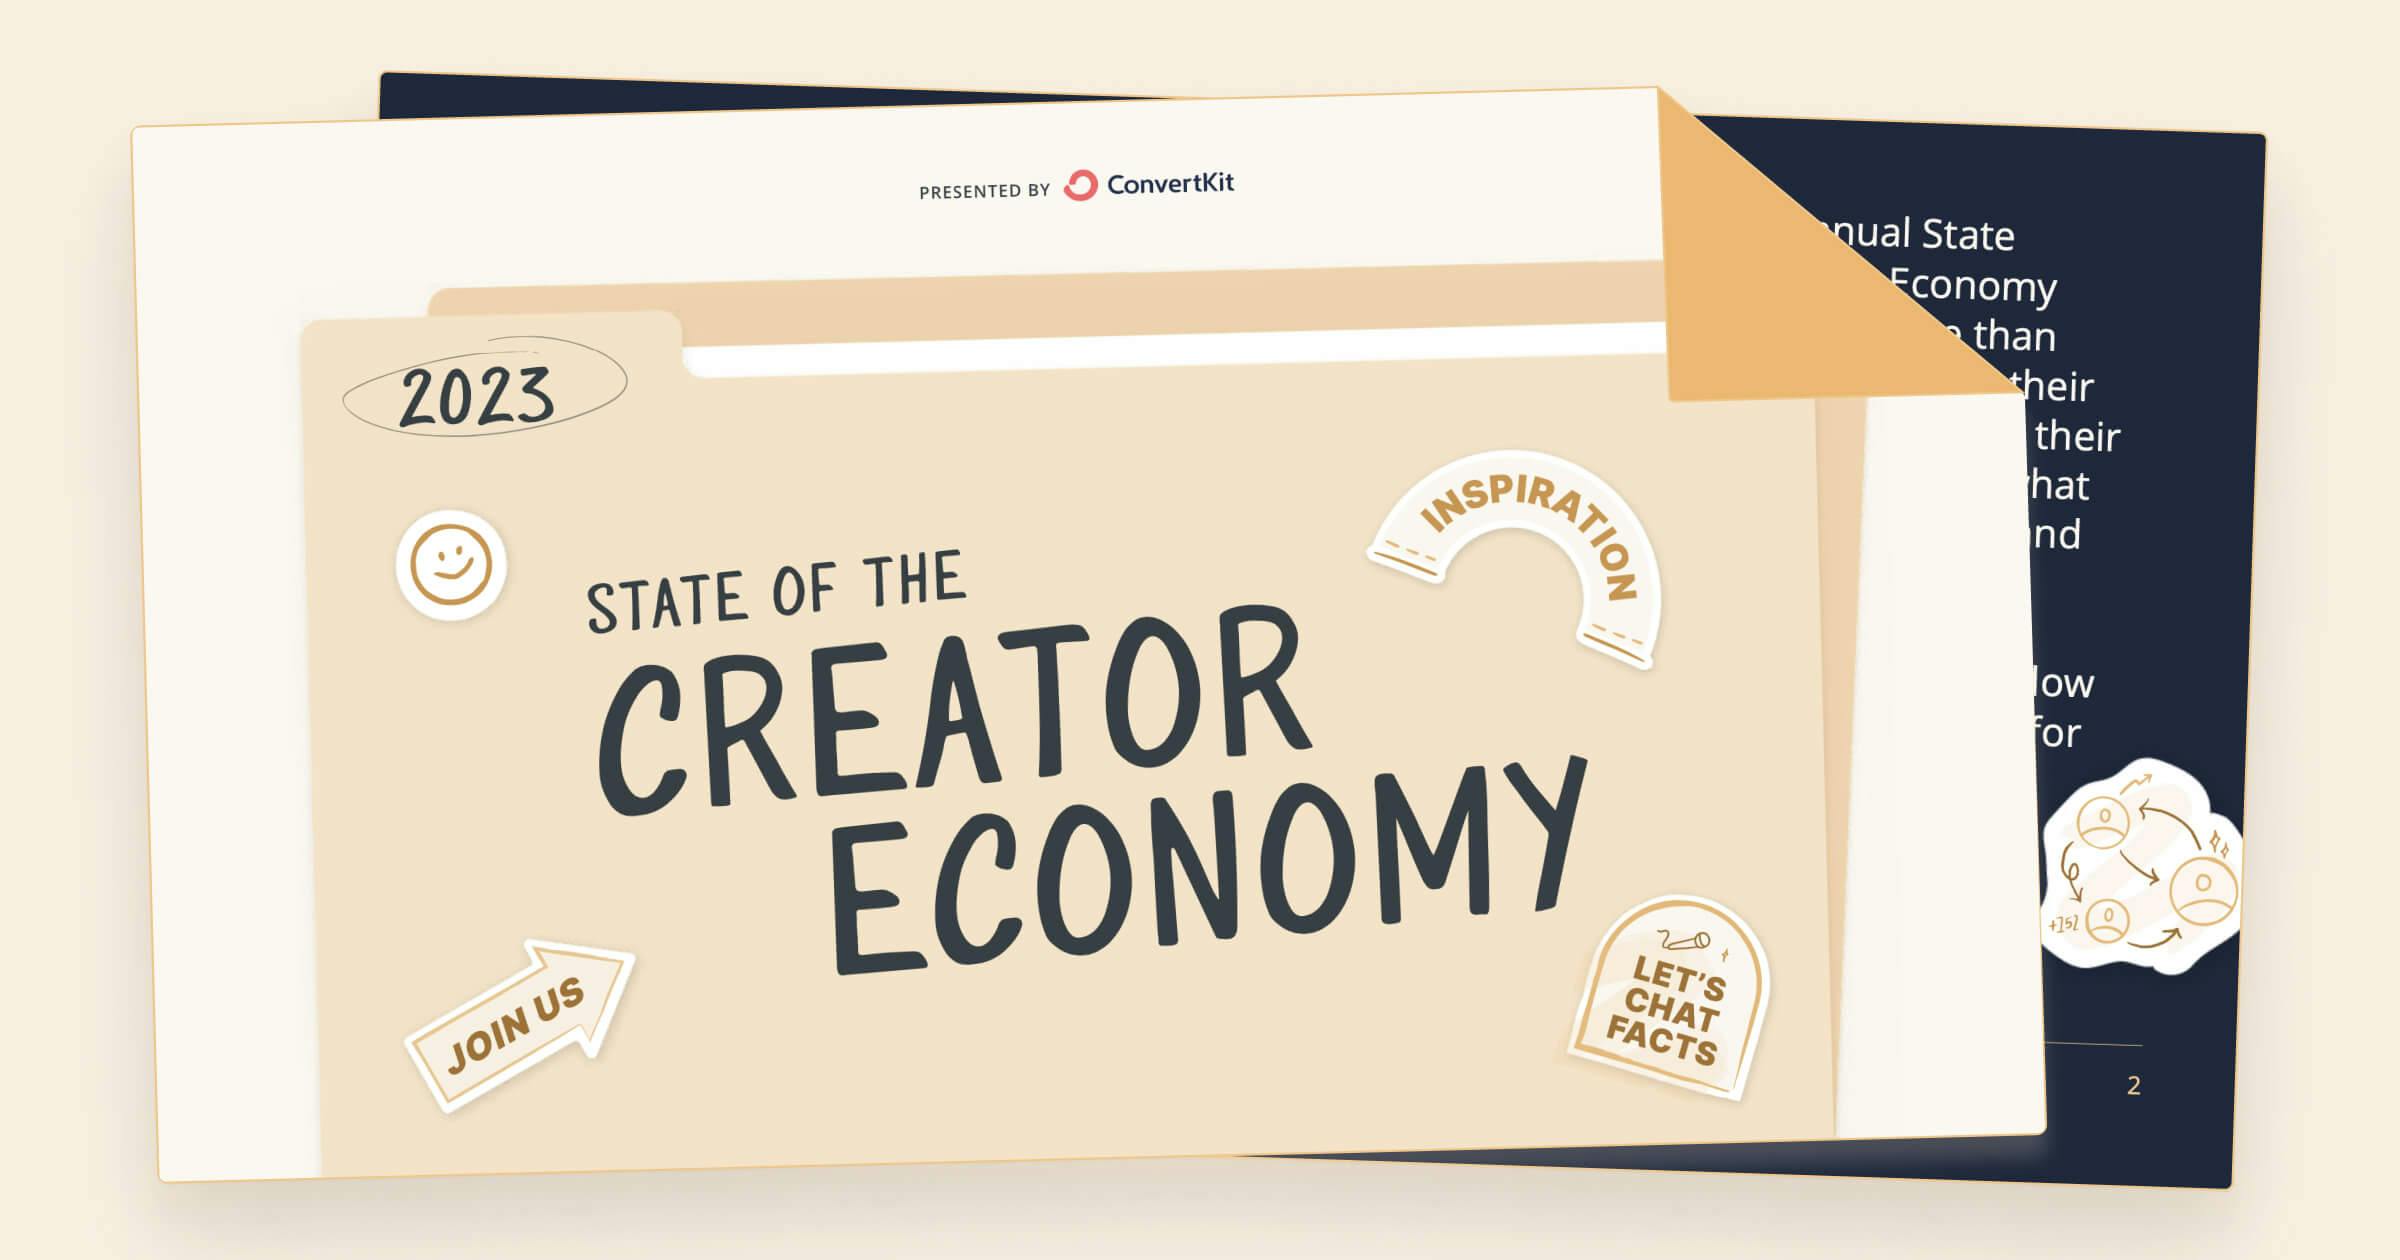 Download the 2023 State of the Creator Economy report